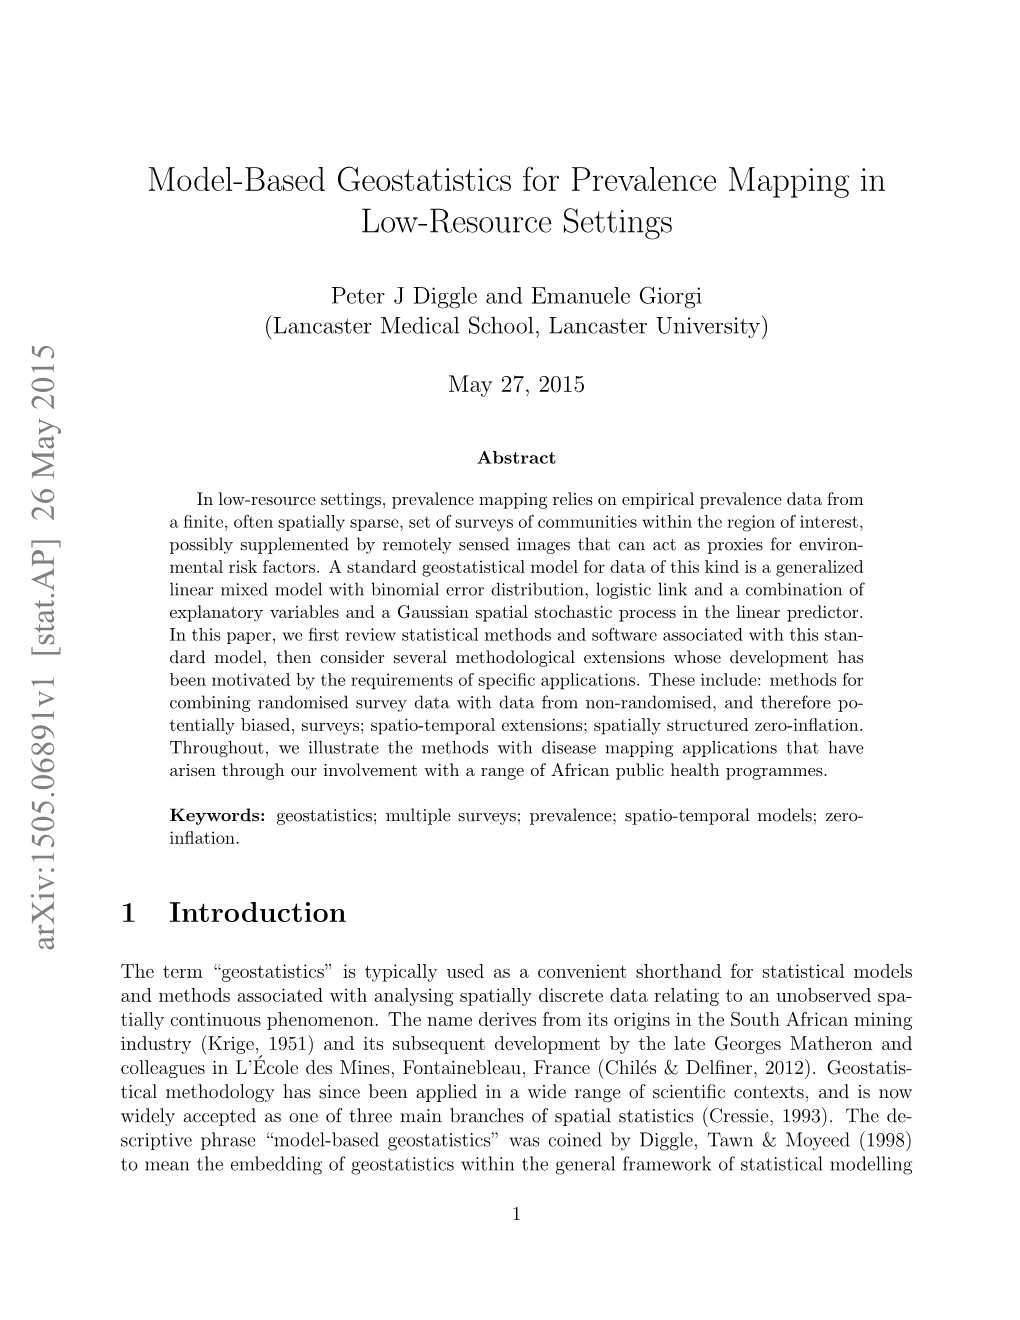 Model-Based Geostatistics for Prevalence Mapping in Low-Resource Settings